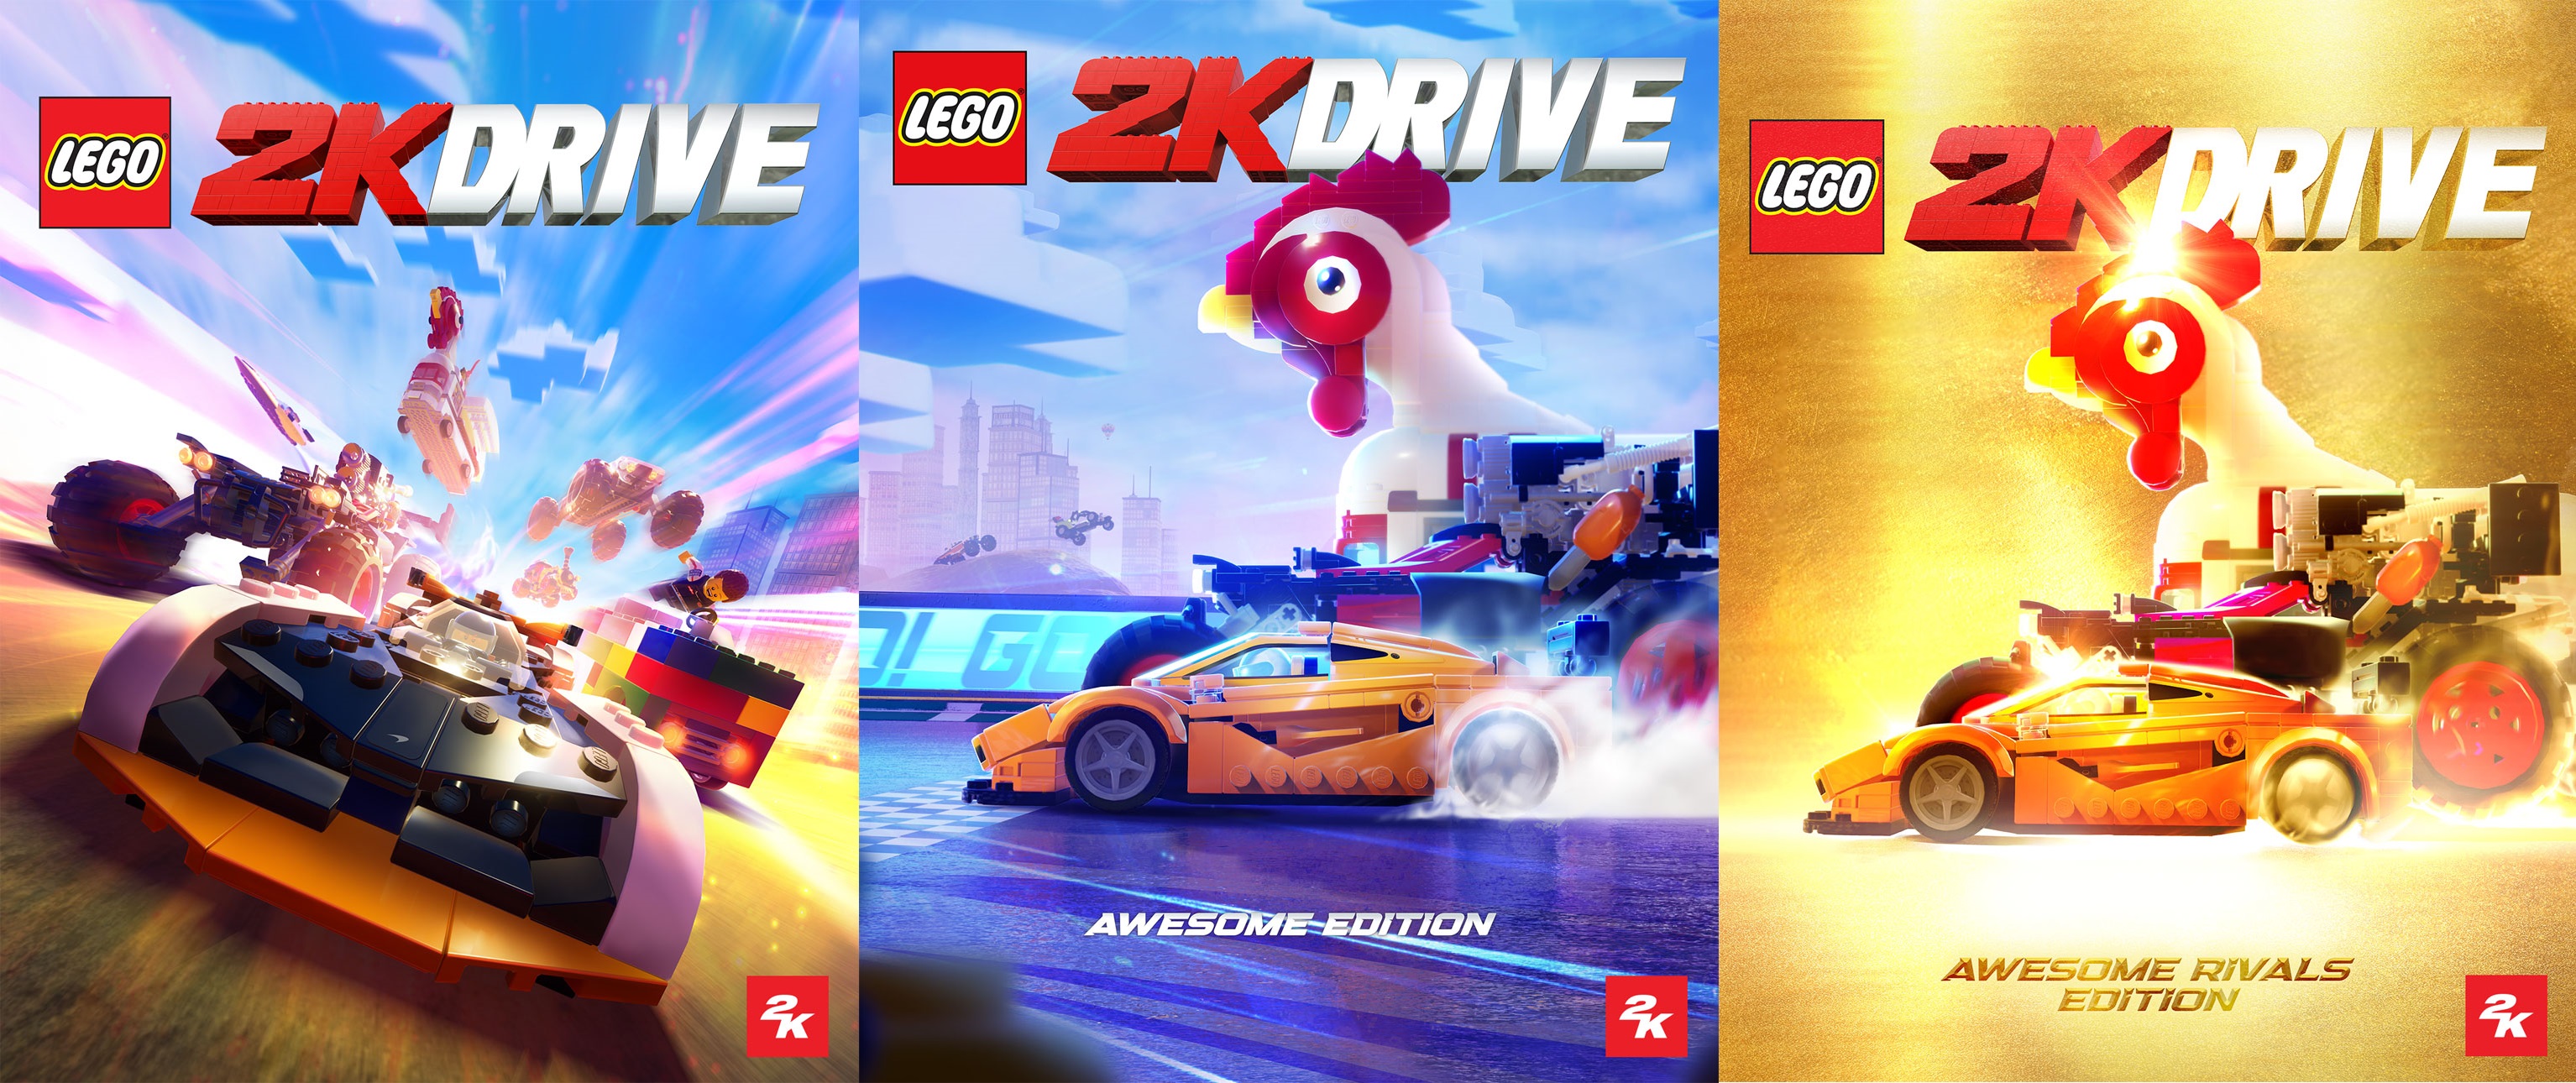 LEGO 2K Drive Officially Announced - The Brick Fan